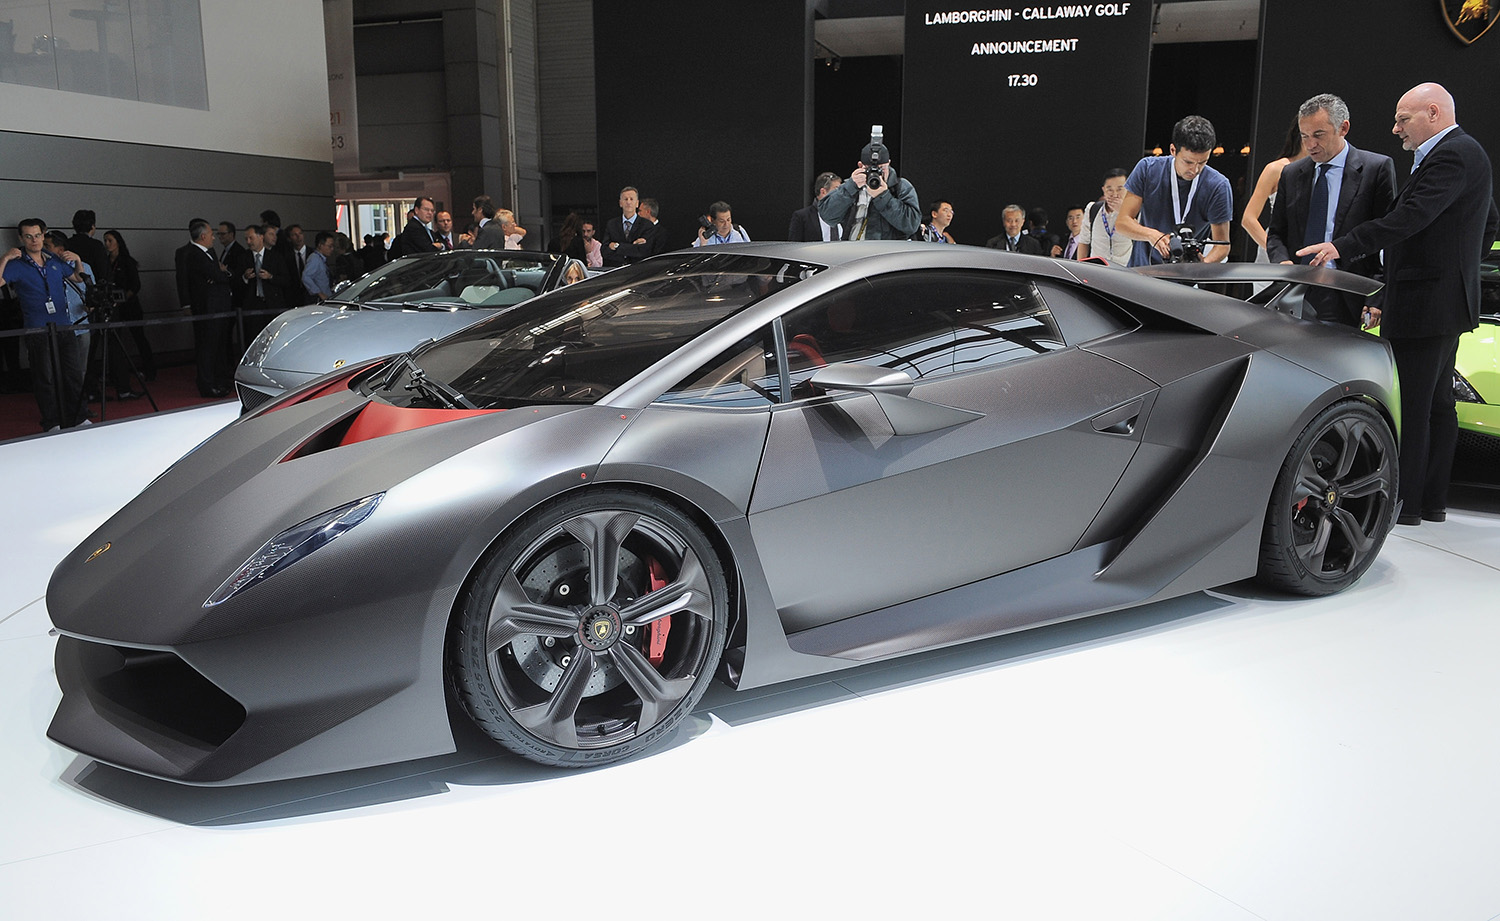 Lamborghini Sesto Elemento, one of the brand's most expensive cars, on display at 2010 Paris motor show